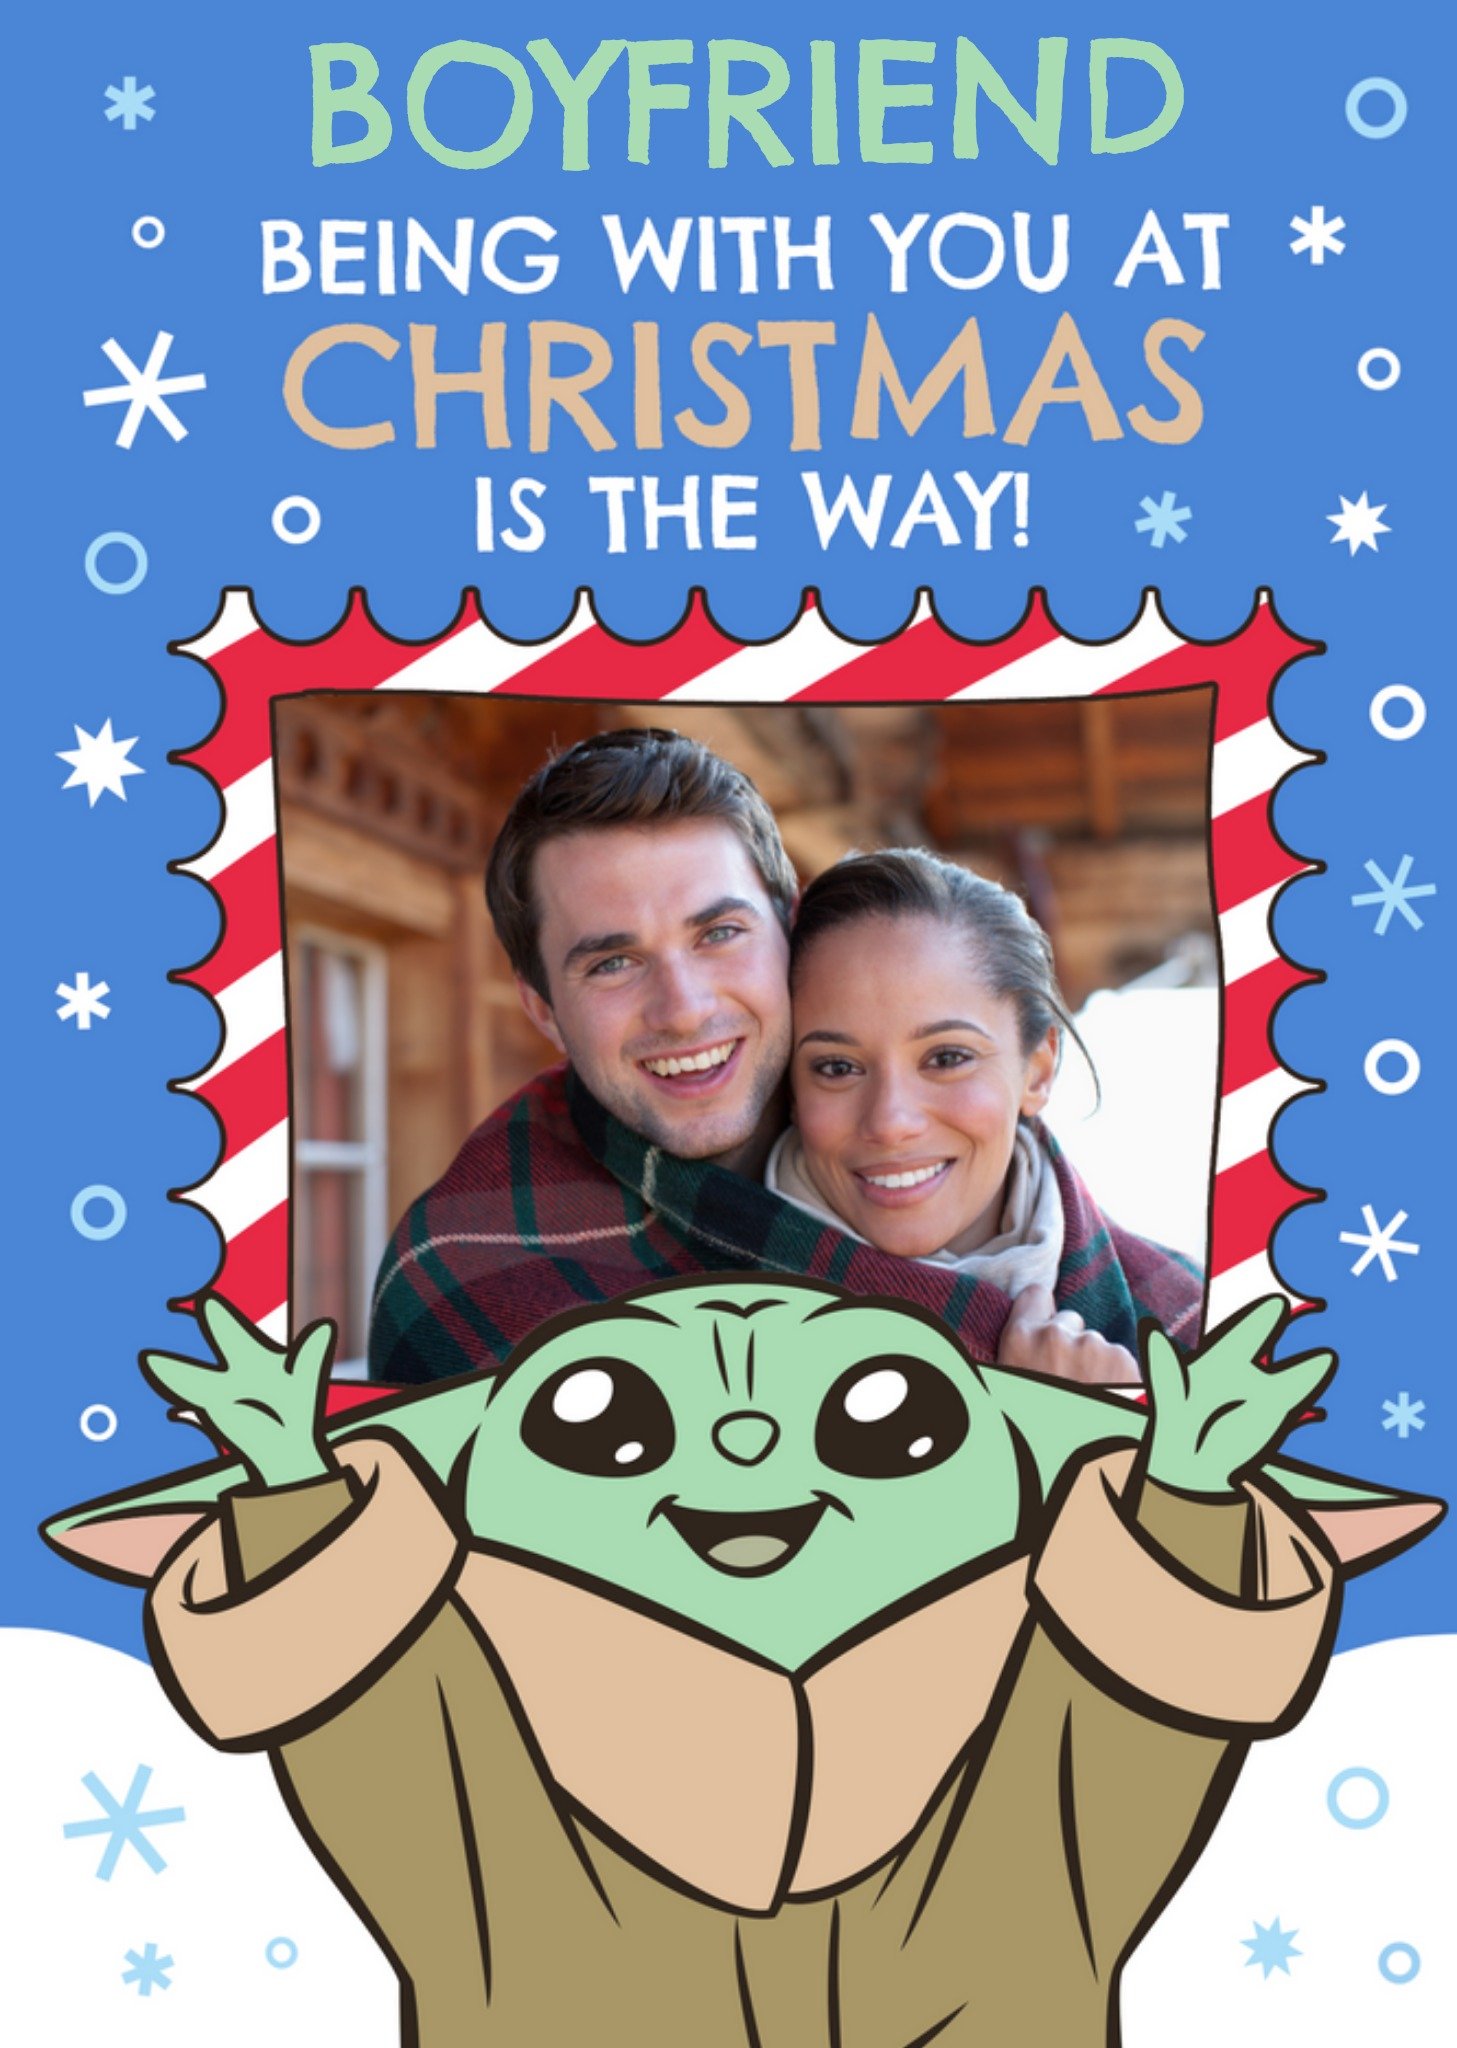 Disney Star Wars The Mandalorian Being With You At Christmas Is The Way Photo Upload Christmas Card,